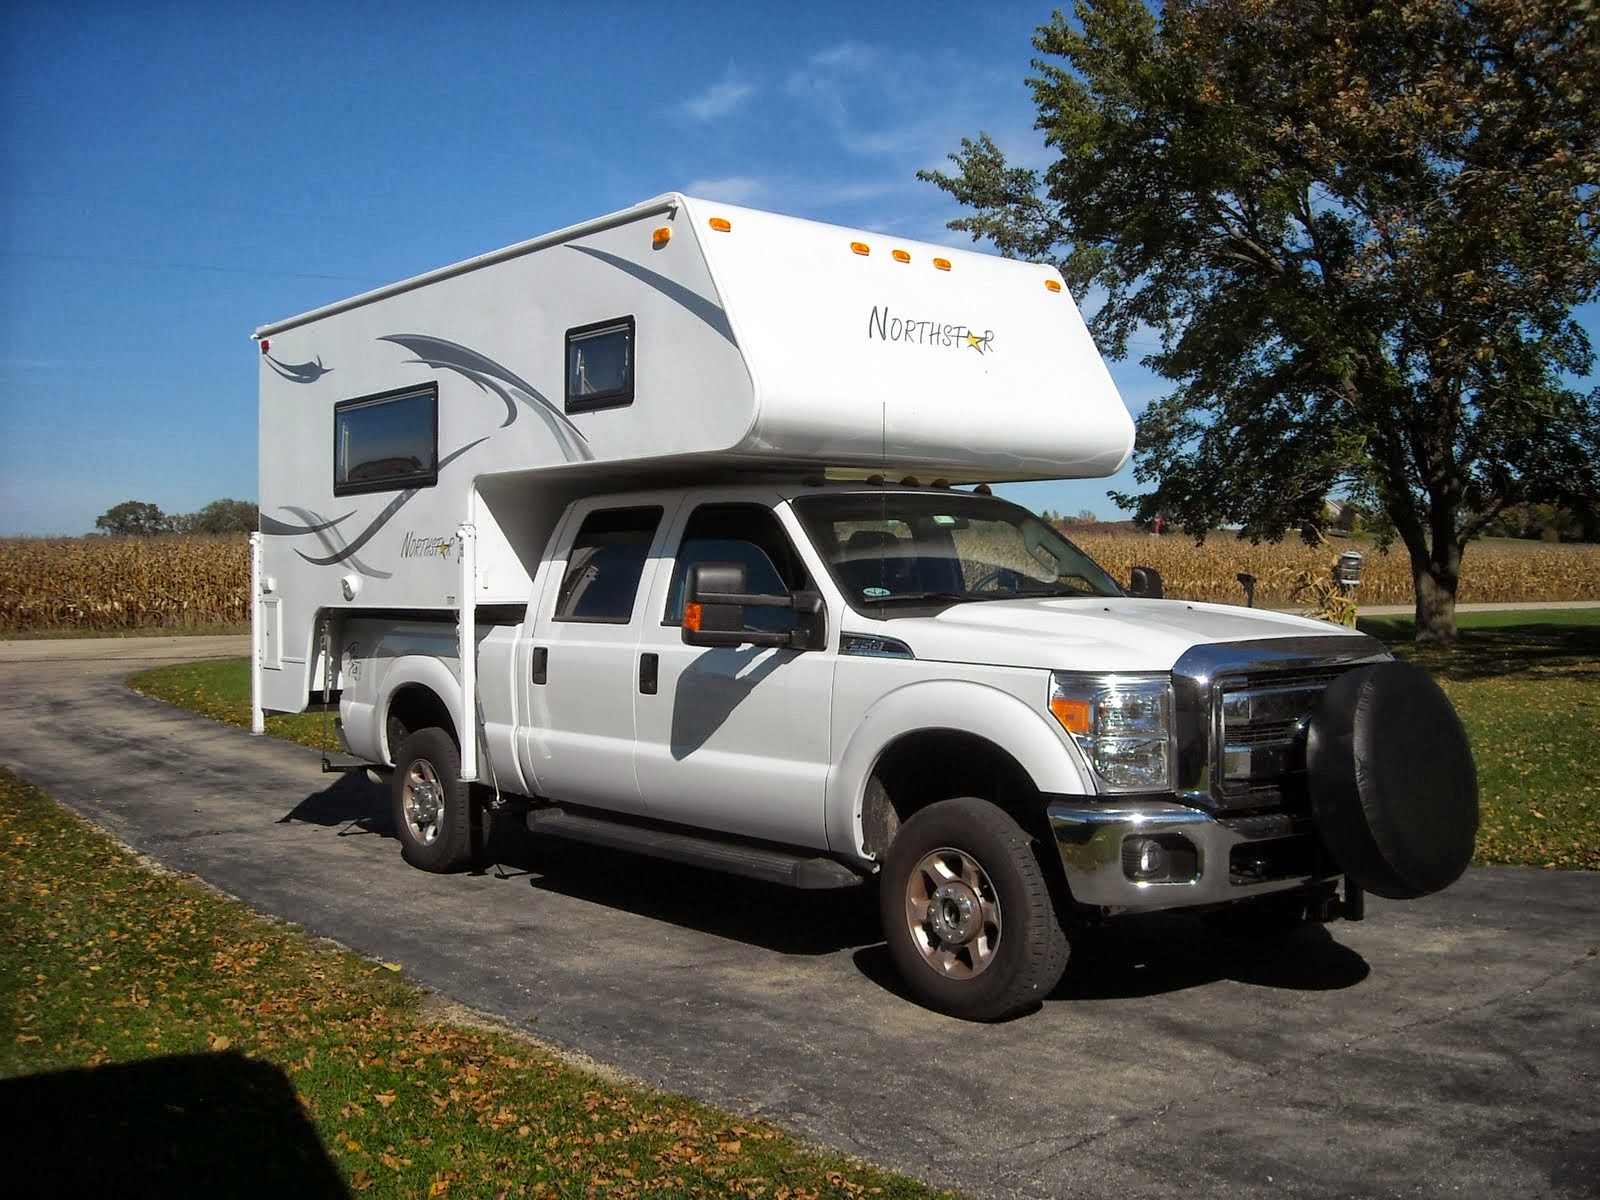 Thom and Dar's Sabbatical Journal: October 18 - The Truck Camper Story